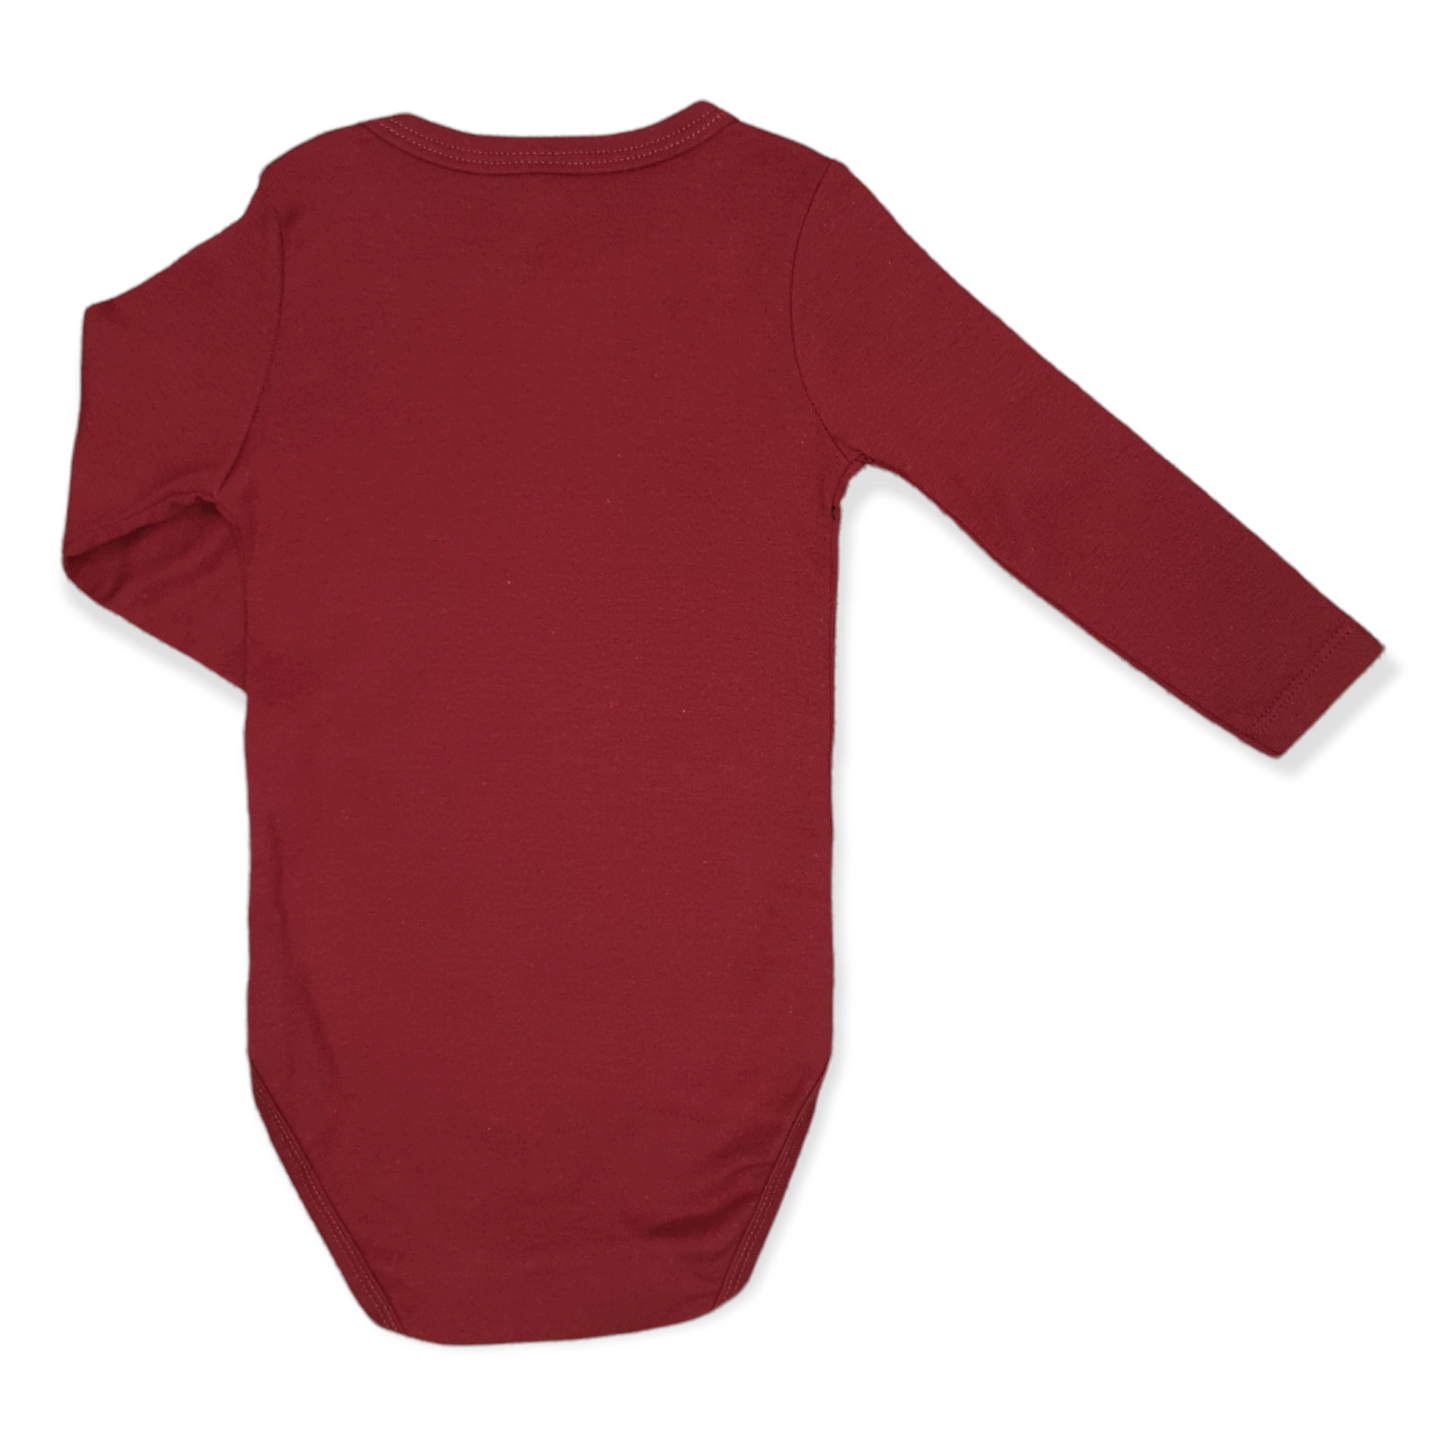 Unisex Ready to Fly Body-Body, Bodysuit, Boy, Burgundy, catboy, catgirl, catunisex, Creeper, Fly, Girl, Long Sleeve, Onesie, Planet, Planets, Rocket, Space, Stars, Unisex-Fuar Baby-[Too Twee]-[Tootwee]-[baby]-[newborn]-[clothes]-[essentials]-[toys]-[Lebanon]